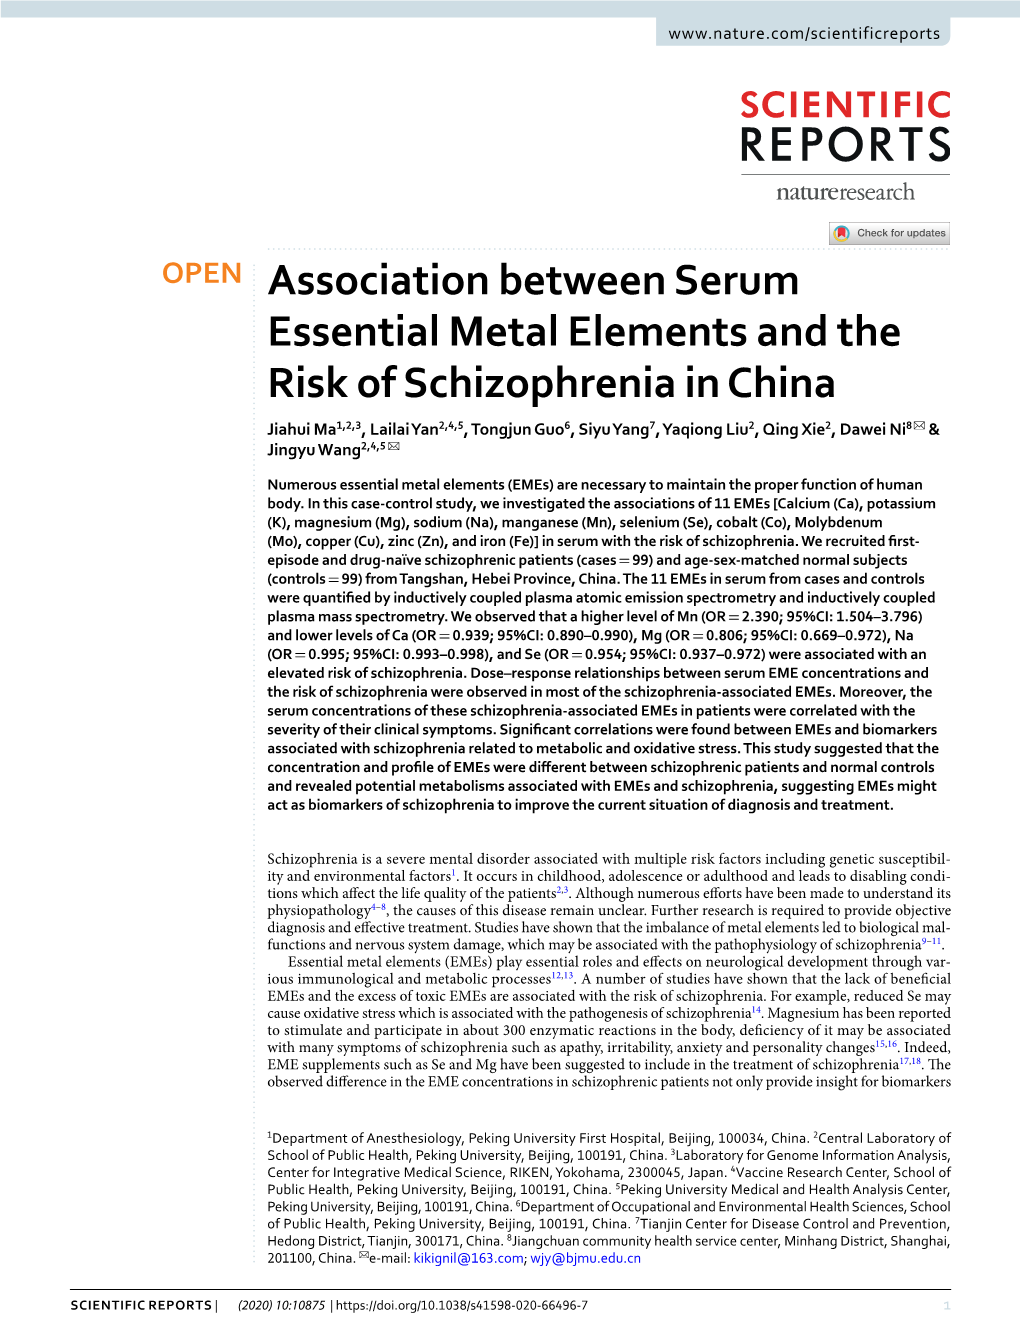 Association Between Serum Essential Metal Elements and the Risk of Schizophrenia in China